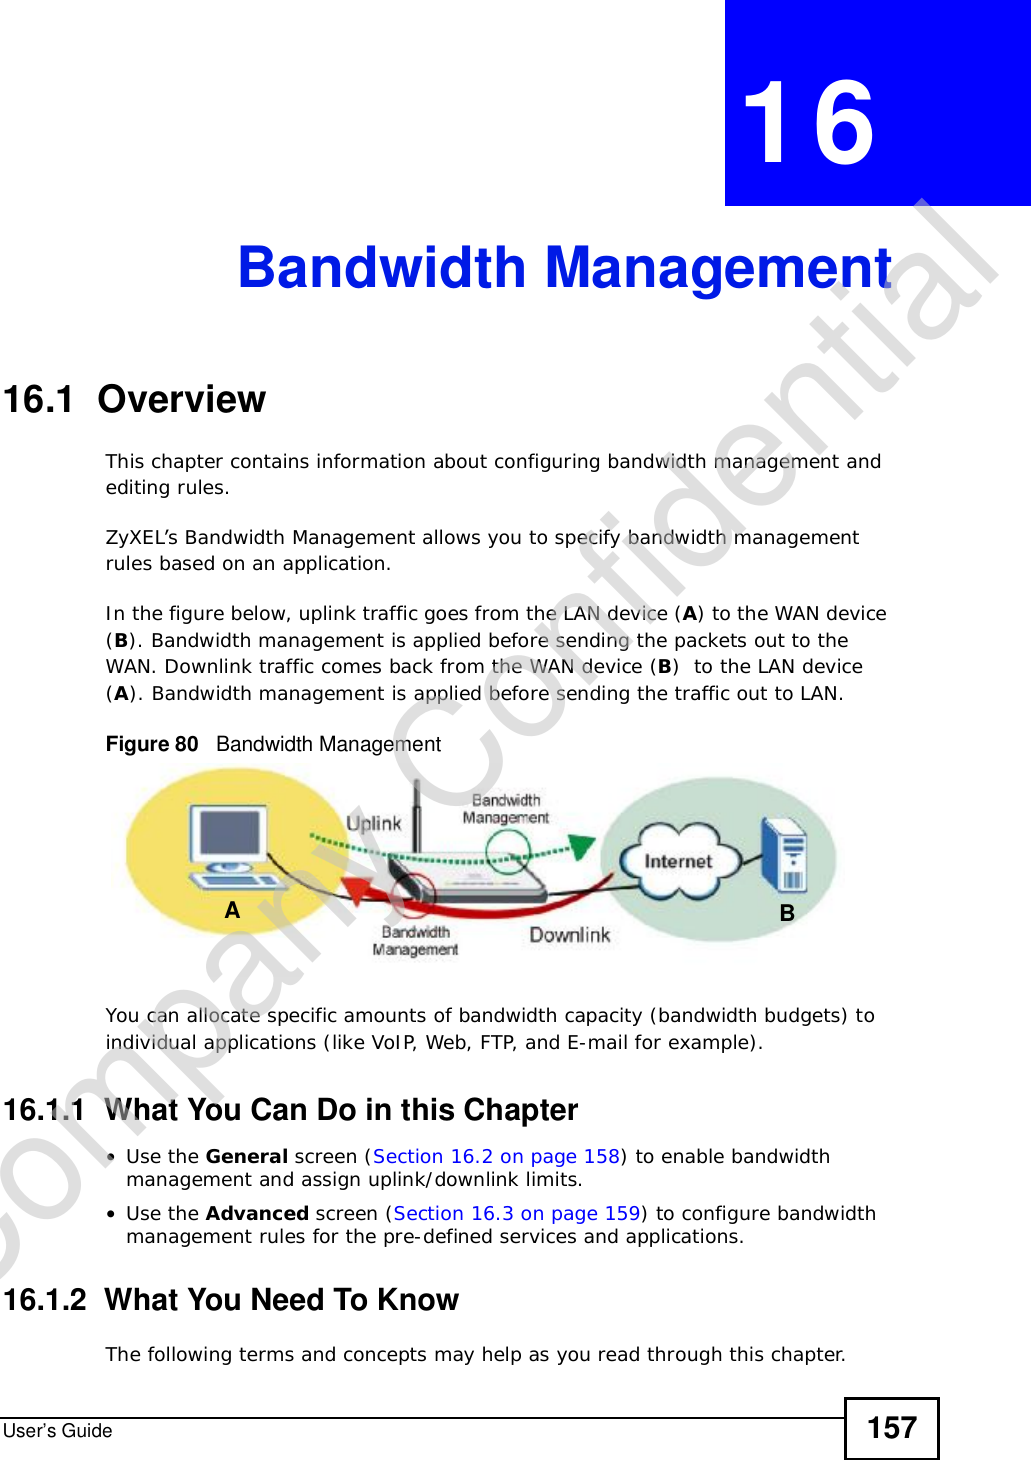 User’s Guide 157CHAPTER 16Bandwidth Management16.1  Overview This chapter contains information about configuring bandwidth management and editing rules.ZyXEL’s Bandwidth Management allows you to specify bandwidth management rules based on an application. In the figure below, uplink traffic goes from the LAN device (A) to the WAN device (B). Bandwidth management is applied before sending the packets out to the WAN. Downlink traffic comes back from the WAN device (B)  to the LAN device (A). Bandwidth management is applied before sending the traffic out to LAN.Figure 80   Bandwidth ManagementYou can allocate specific amounts of bandwidth capacity (bandwidth budgets) to individual applications (like VoIP, Web, FTP, and E-mail for example).16.1.1  What You Can Do in this Chapter•Use the General screen (Section 16.2 on page 158) to enable bandwidth management and assign uplink/downlink limits.•Use the Advanced screen (Section 16.3 on page 159) to configure bandwidth management rules for the pre-defined services and applications.16.1.2  What You Need To KnowThe following terms and concepts may help as you read through this chapter.ABCompany Confidential